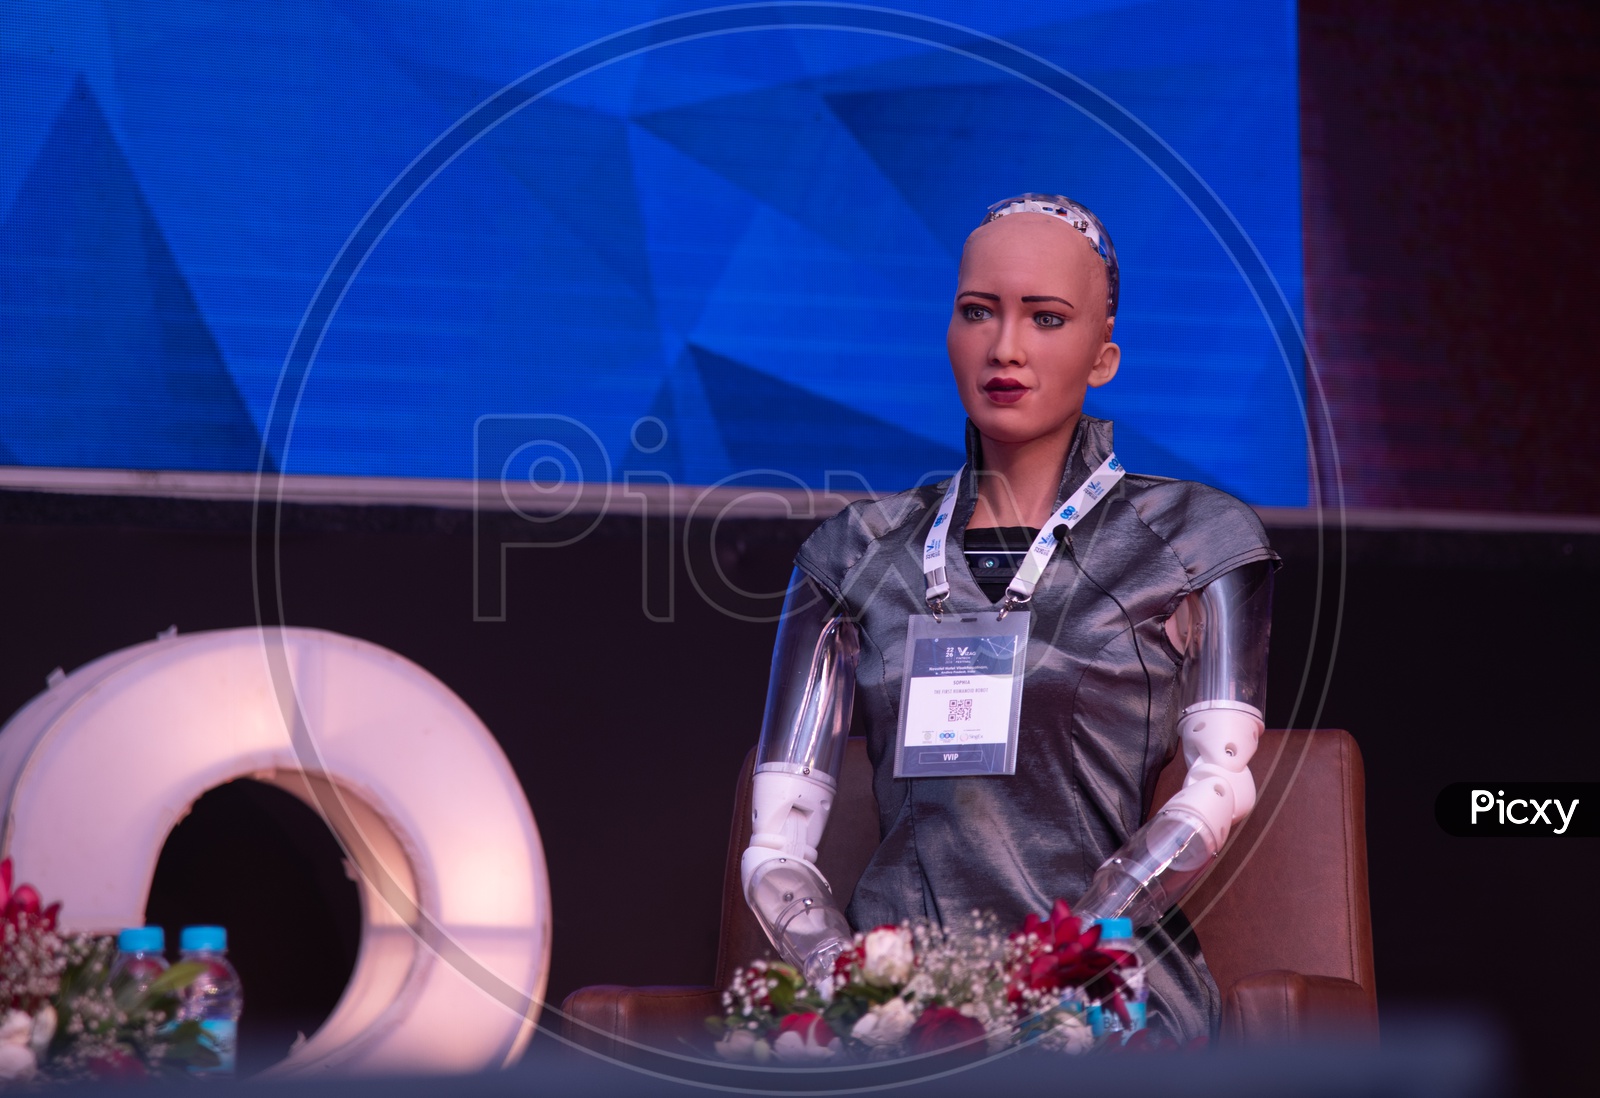 Different Facial Expressions of SOPHIA, First Humanoid Robot with UAE Citizenship at Vizag Fintech Valley festival, 2018